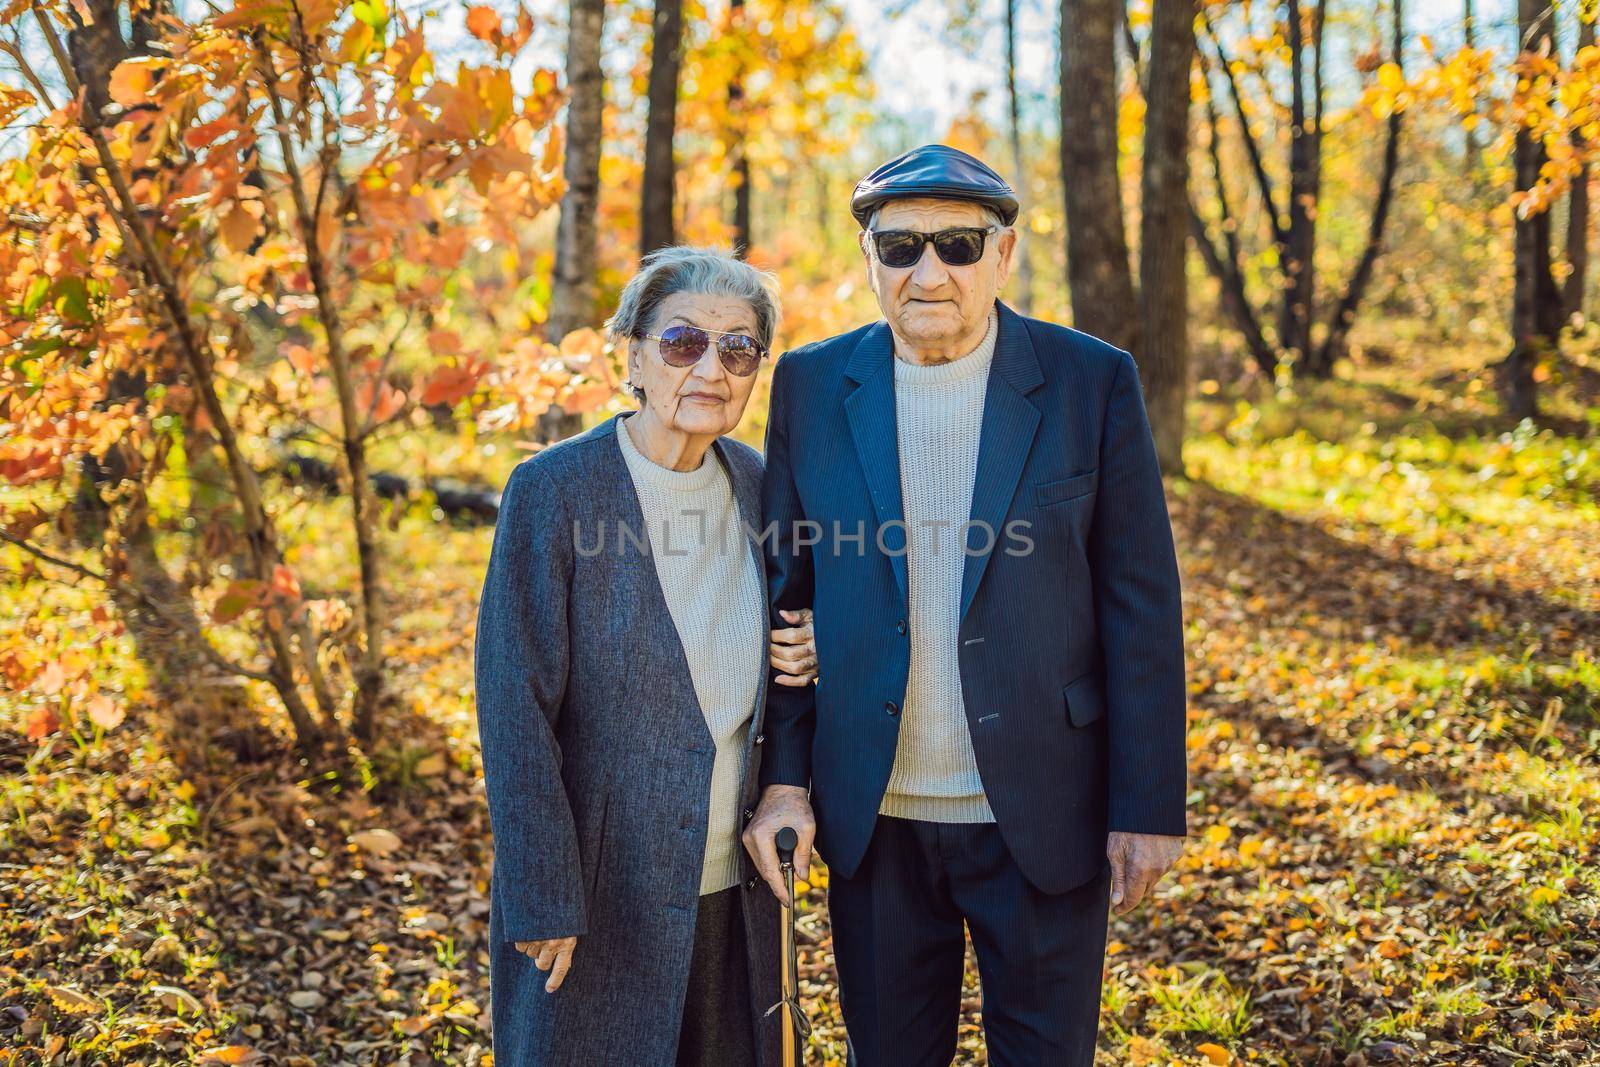 Pensioners in sunglasses in the autumn forest. Pensioners like gangsters.